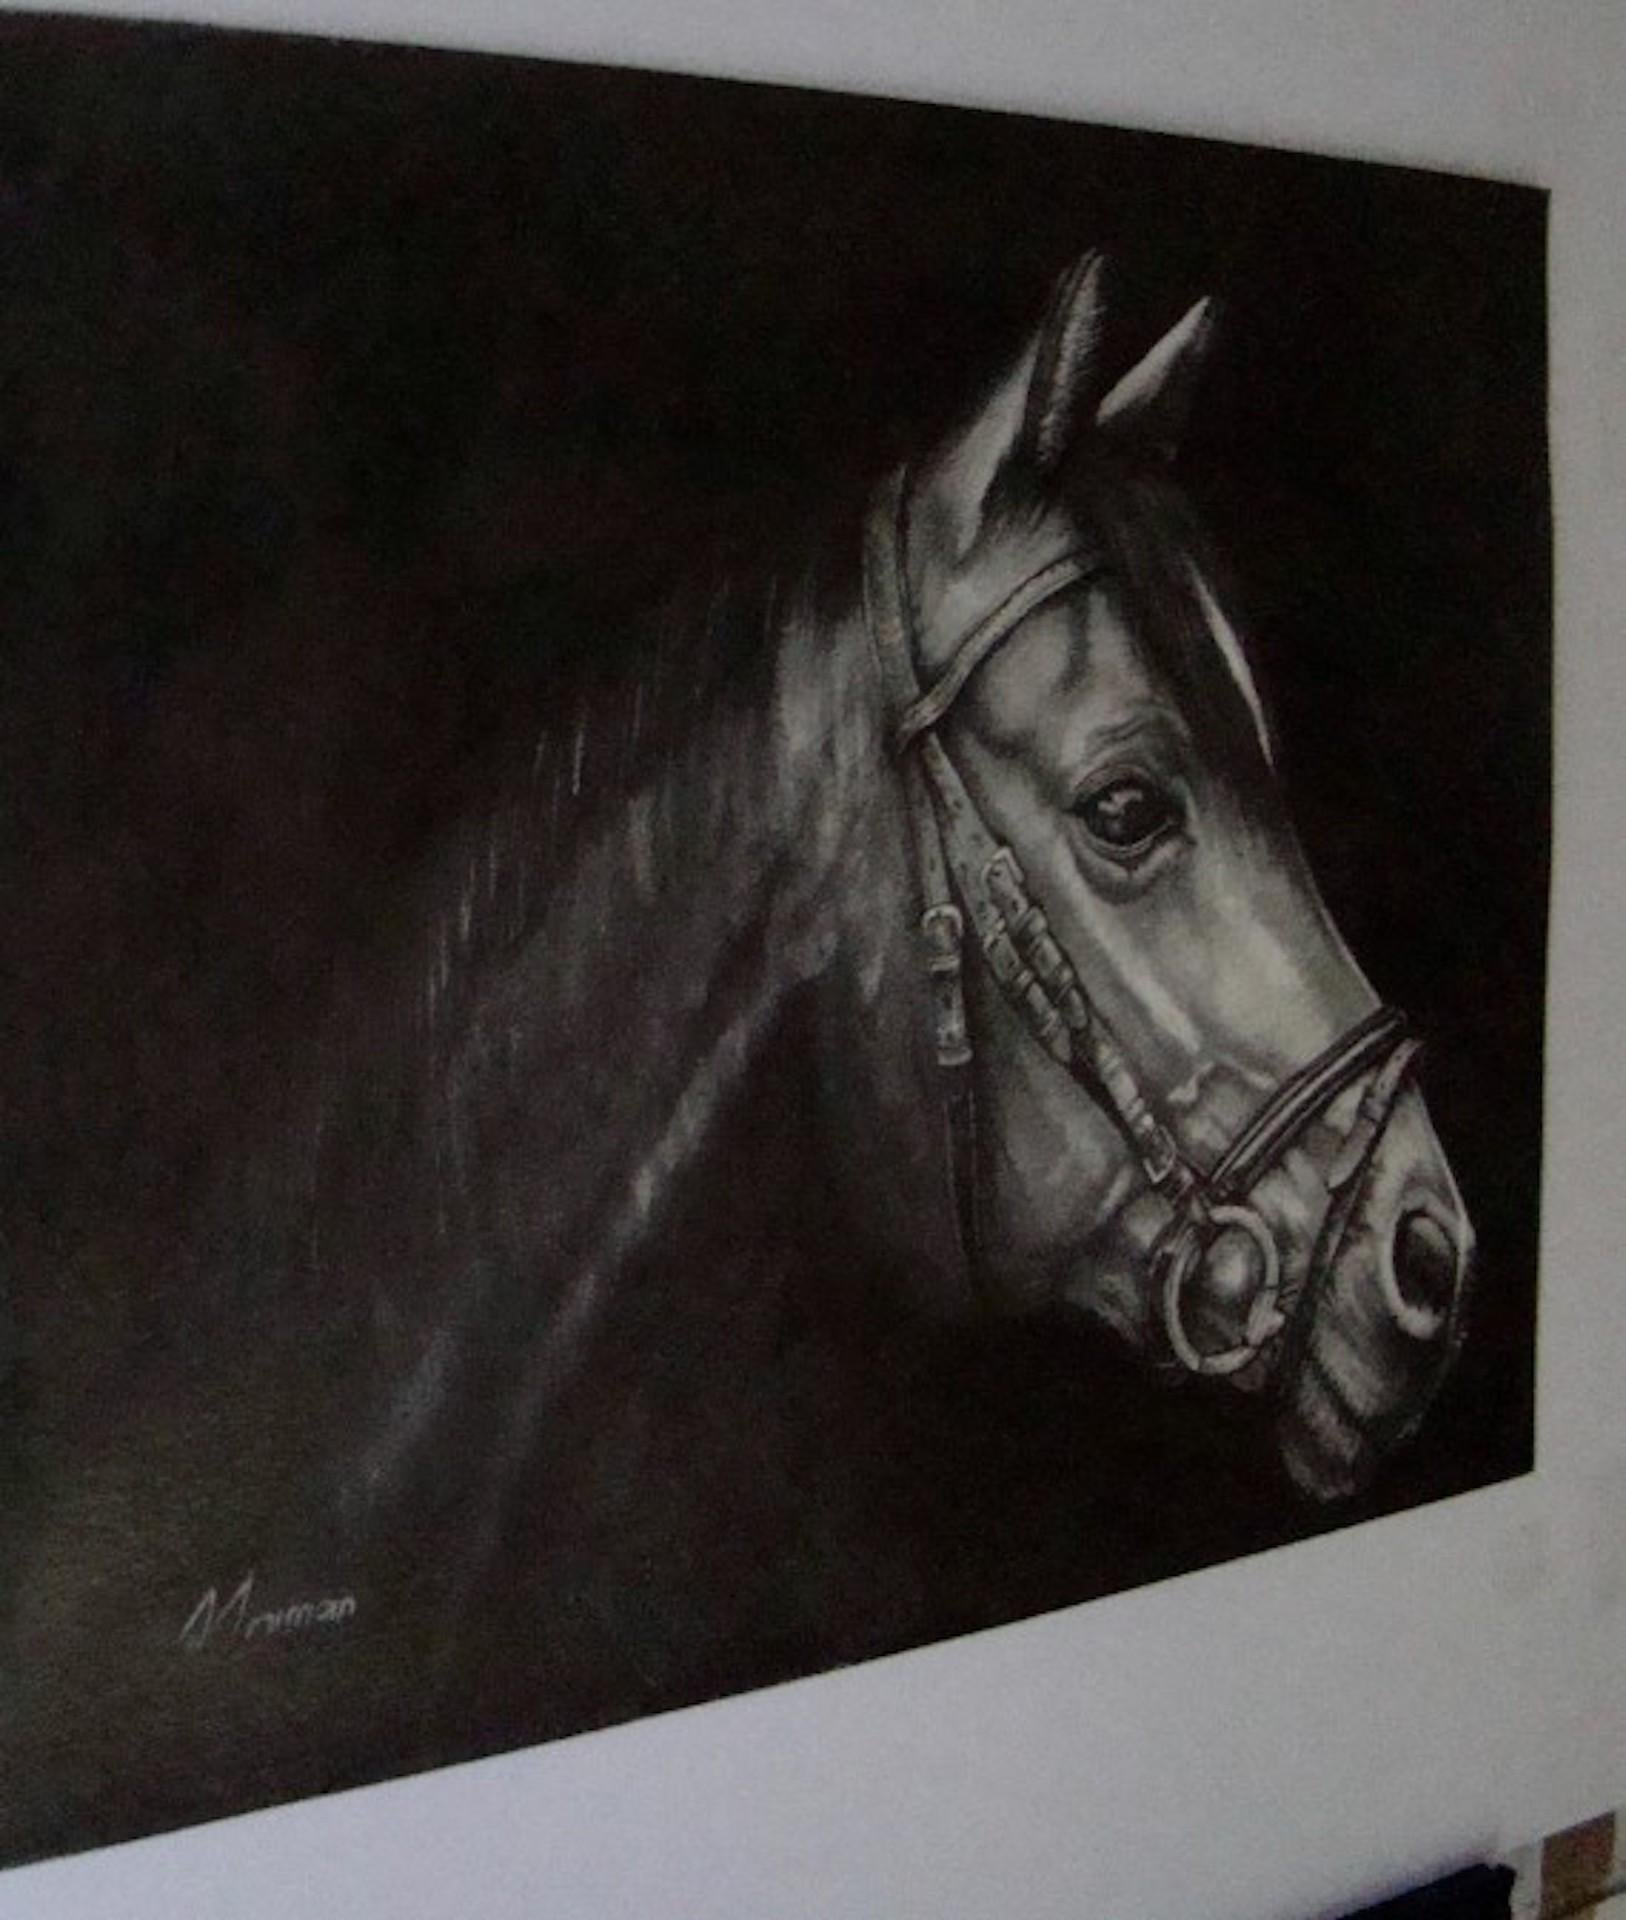 Out of Darkness [2019]
Original
Figurative
Graphite on paper
Size: H:38.5 cm x W:49.0 cm x D:0.2cm
Sold Unframed
Please note that insitu images are purely an indication of how a piece may look

Out Of Darkness is created by using graphite pencils on